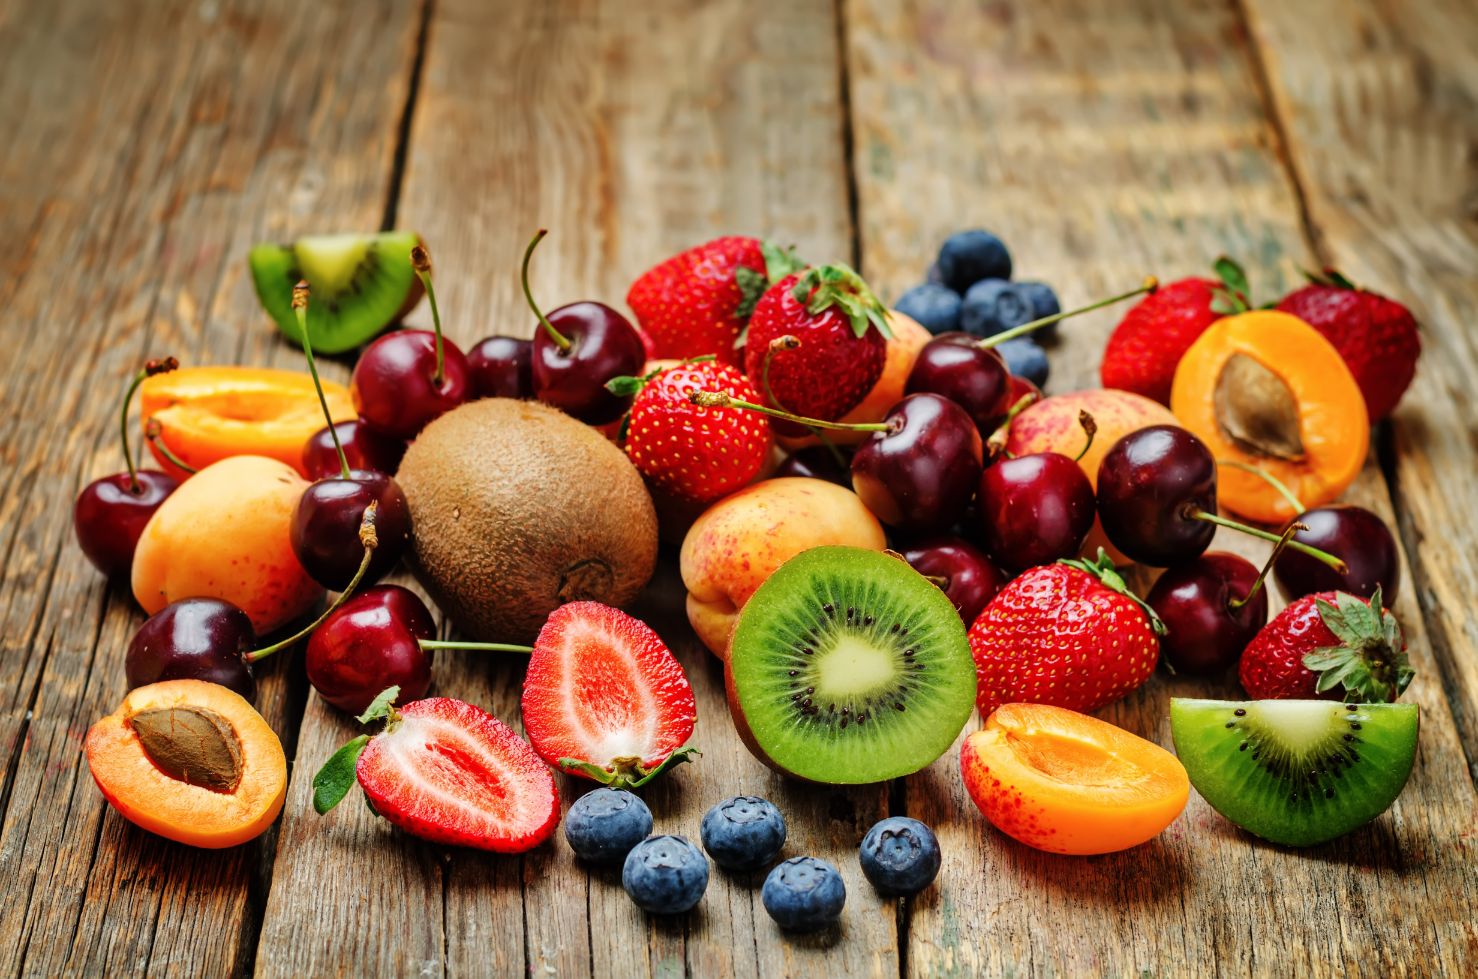 Collection of fruits and berries on wood table.